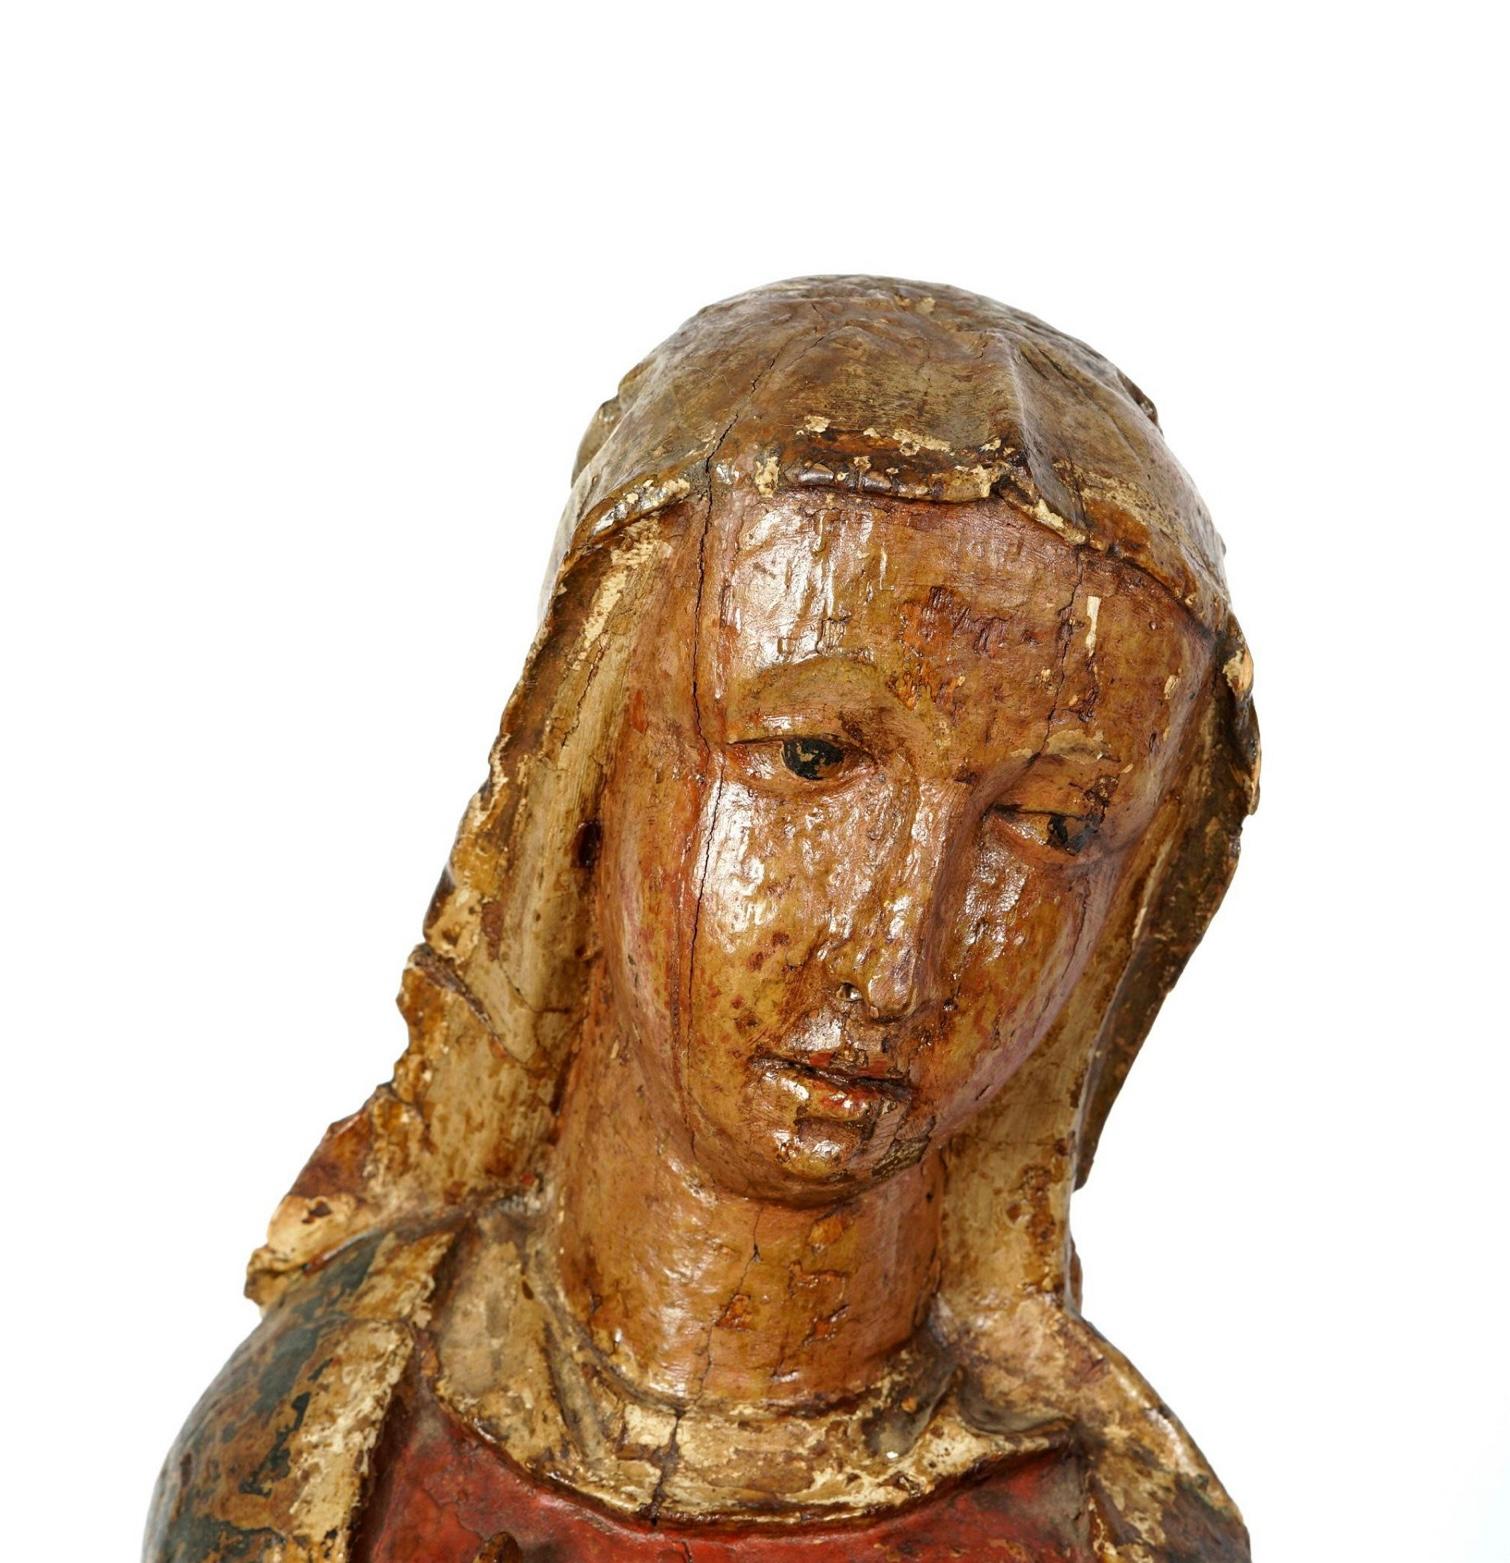 The Virgin Mary and St-John the Evangelist, from a Crucifixion. In wood with remains of polychromy. Probably Tyrol, German or Austrian. circa 1500s.
Statues in carved wood with what appears to be original polychromy finish worn to a wonderful